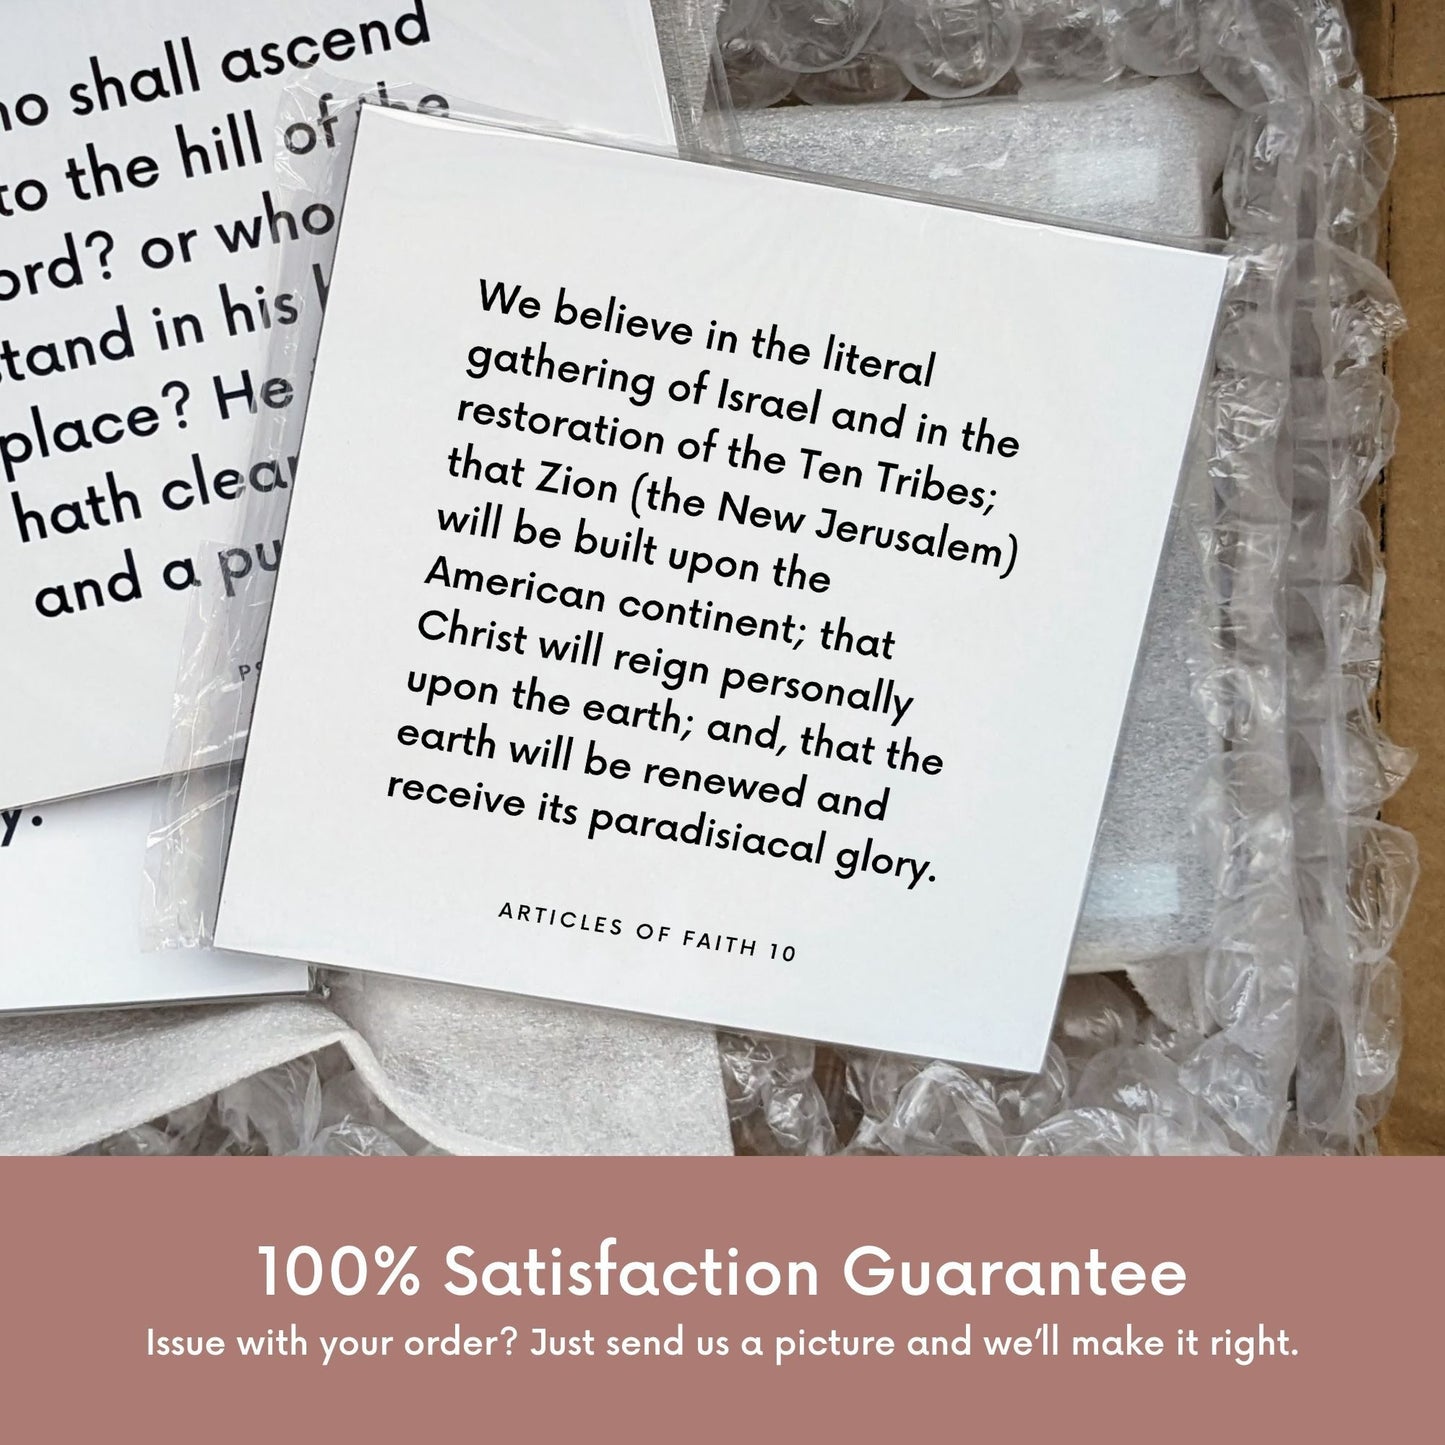 Shipping materials for scripture tile of Articles of Faith 10 - "We believe in the literal gathering of Israel"